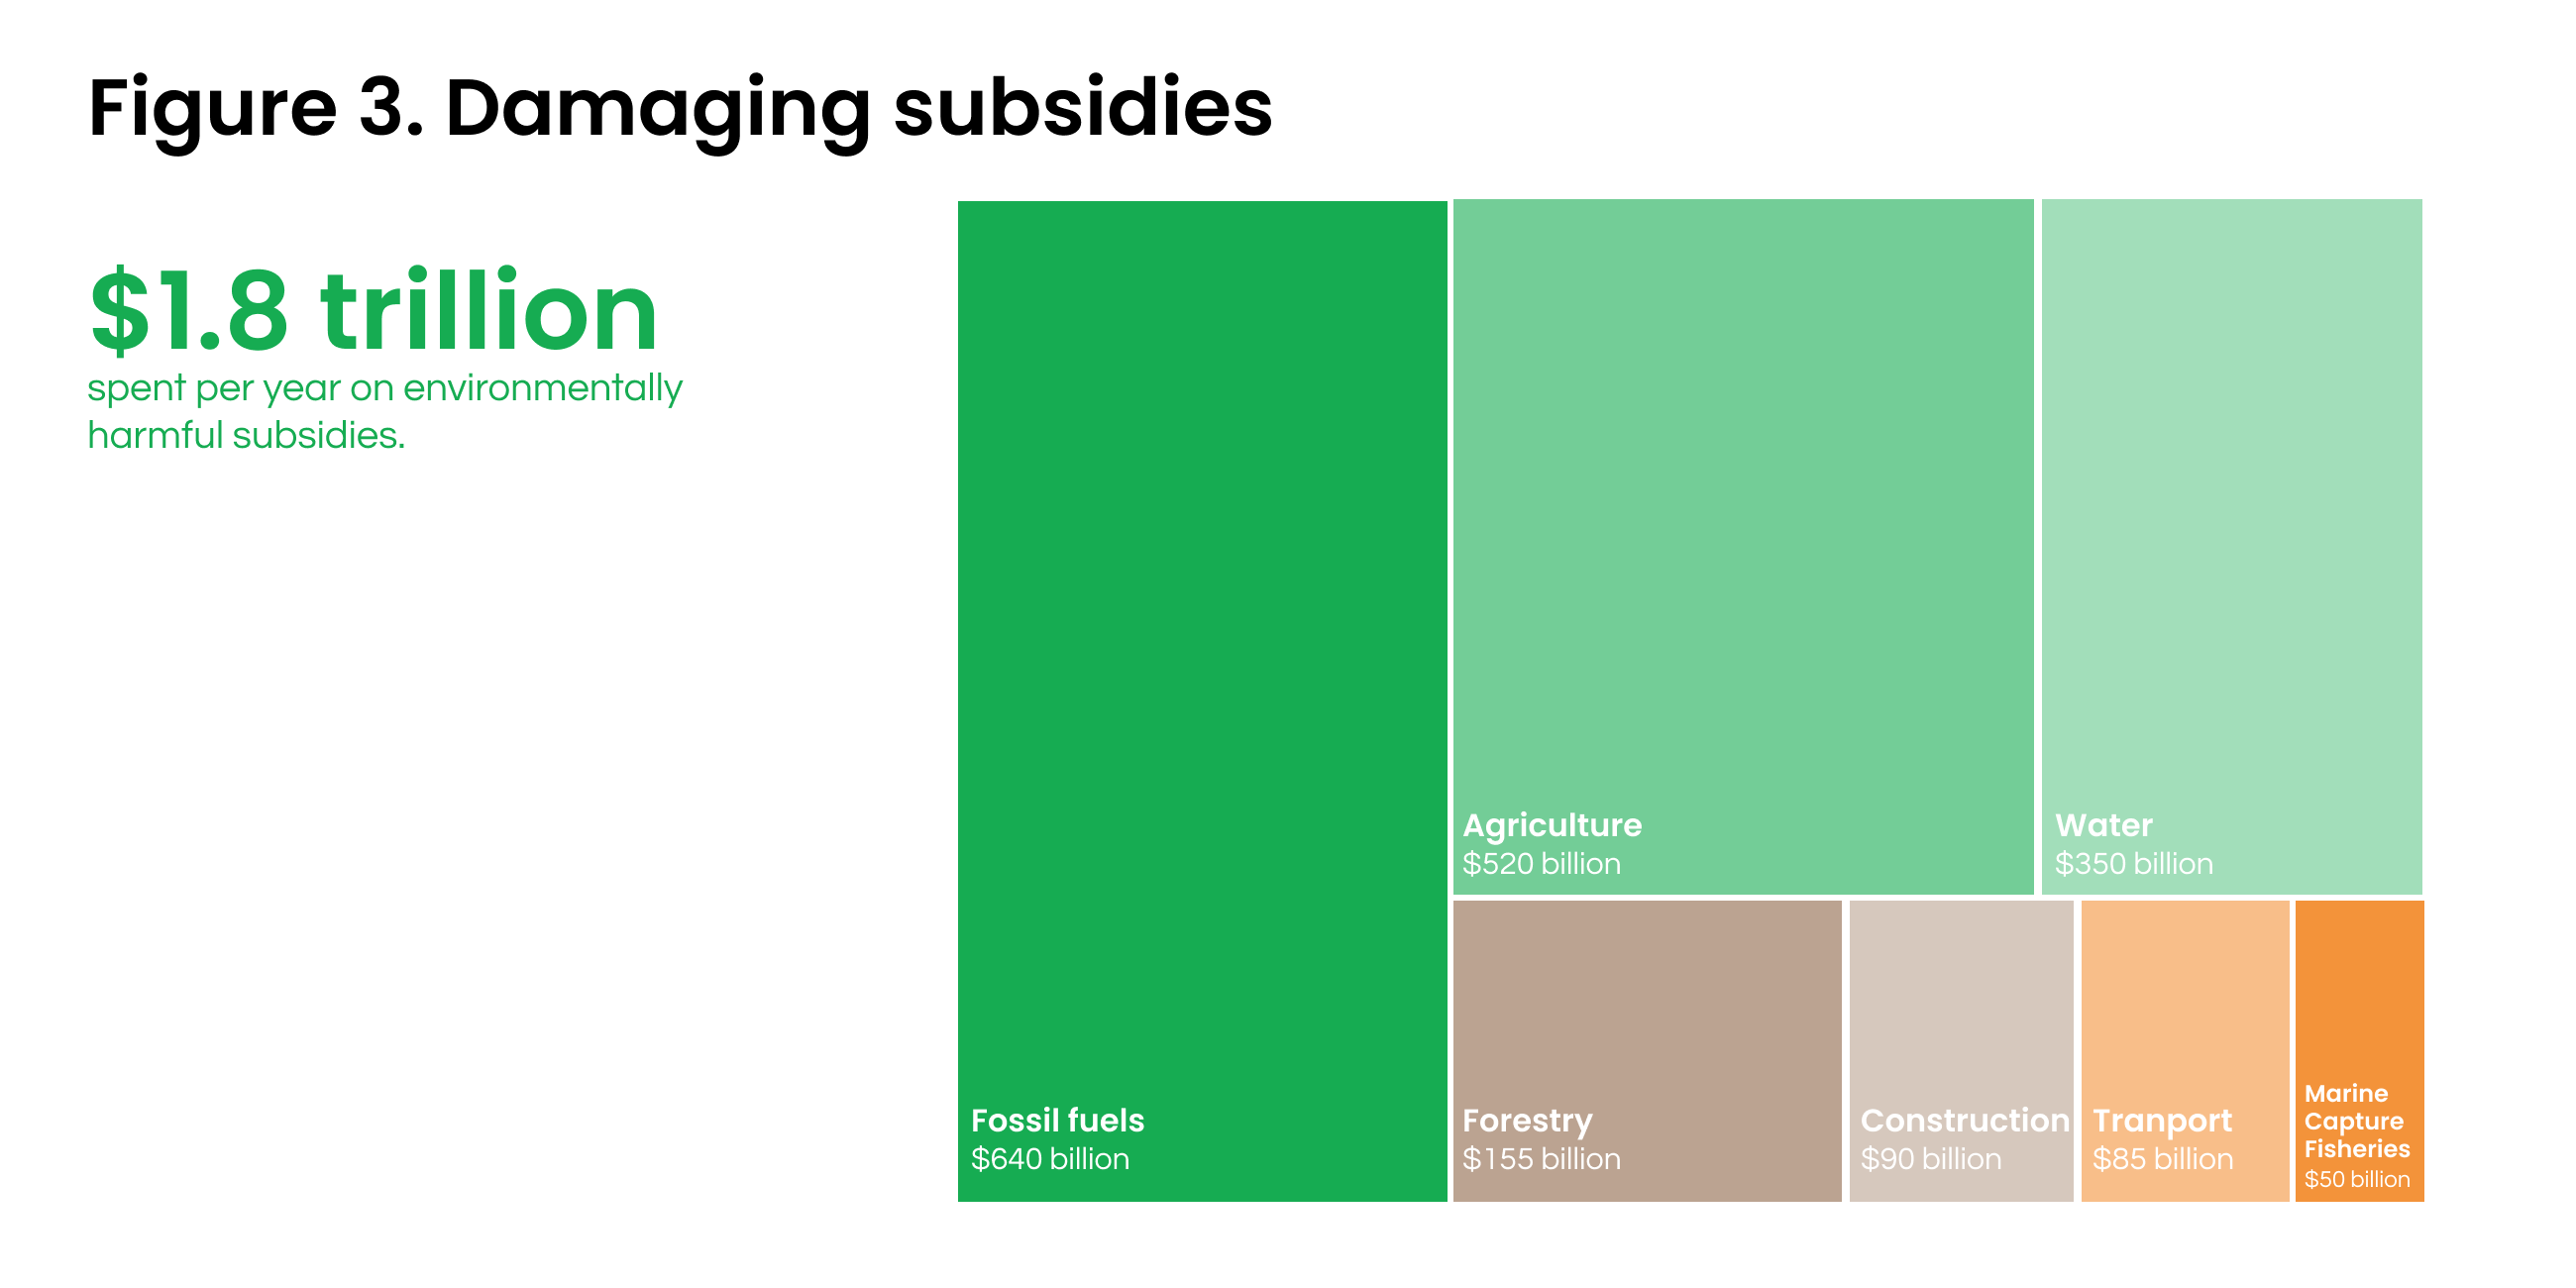 Subsidies towards damaging activities for the environment